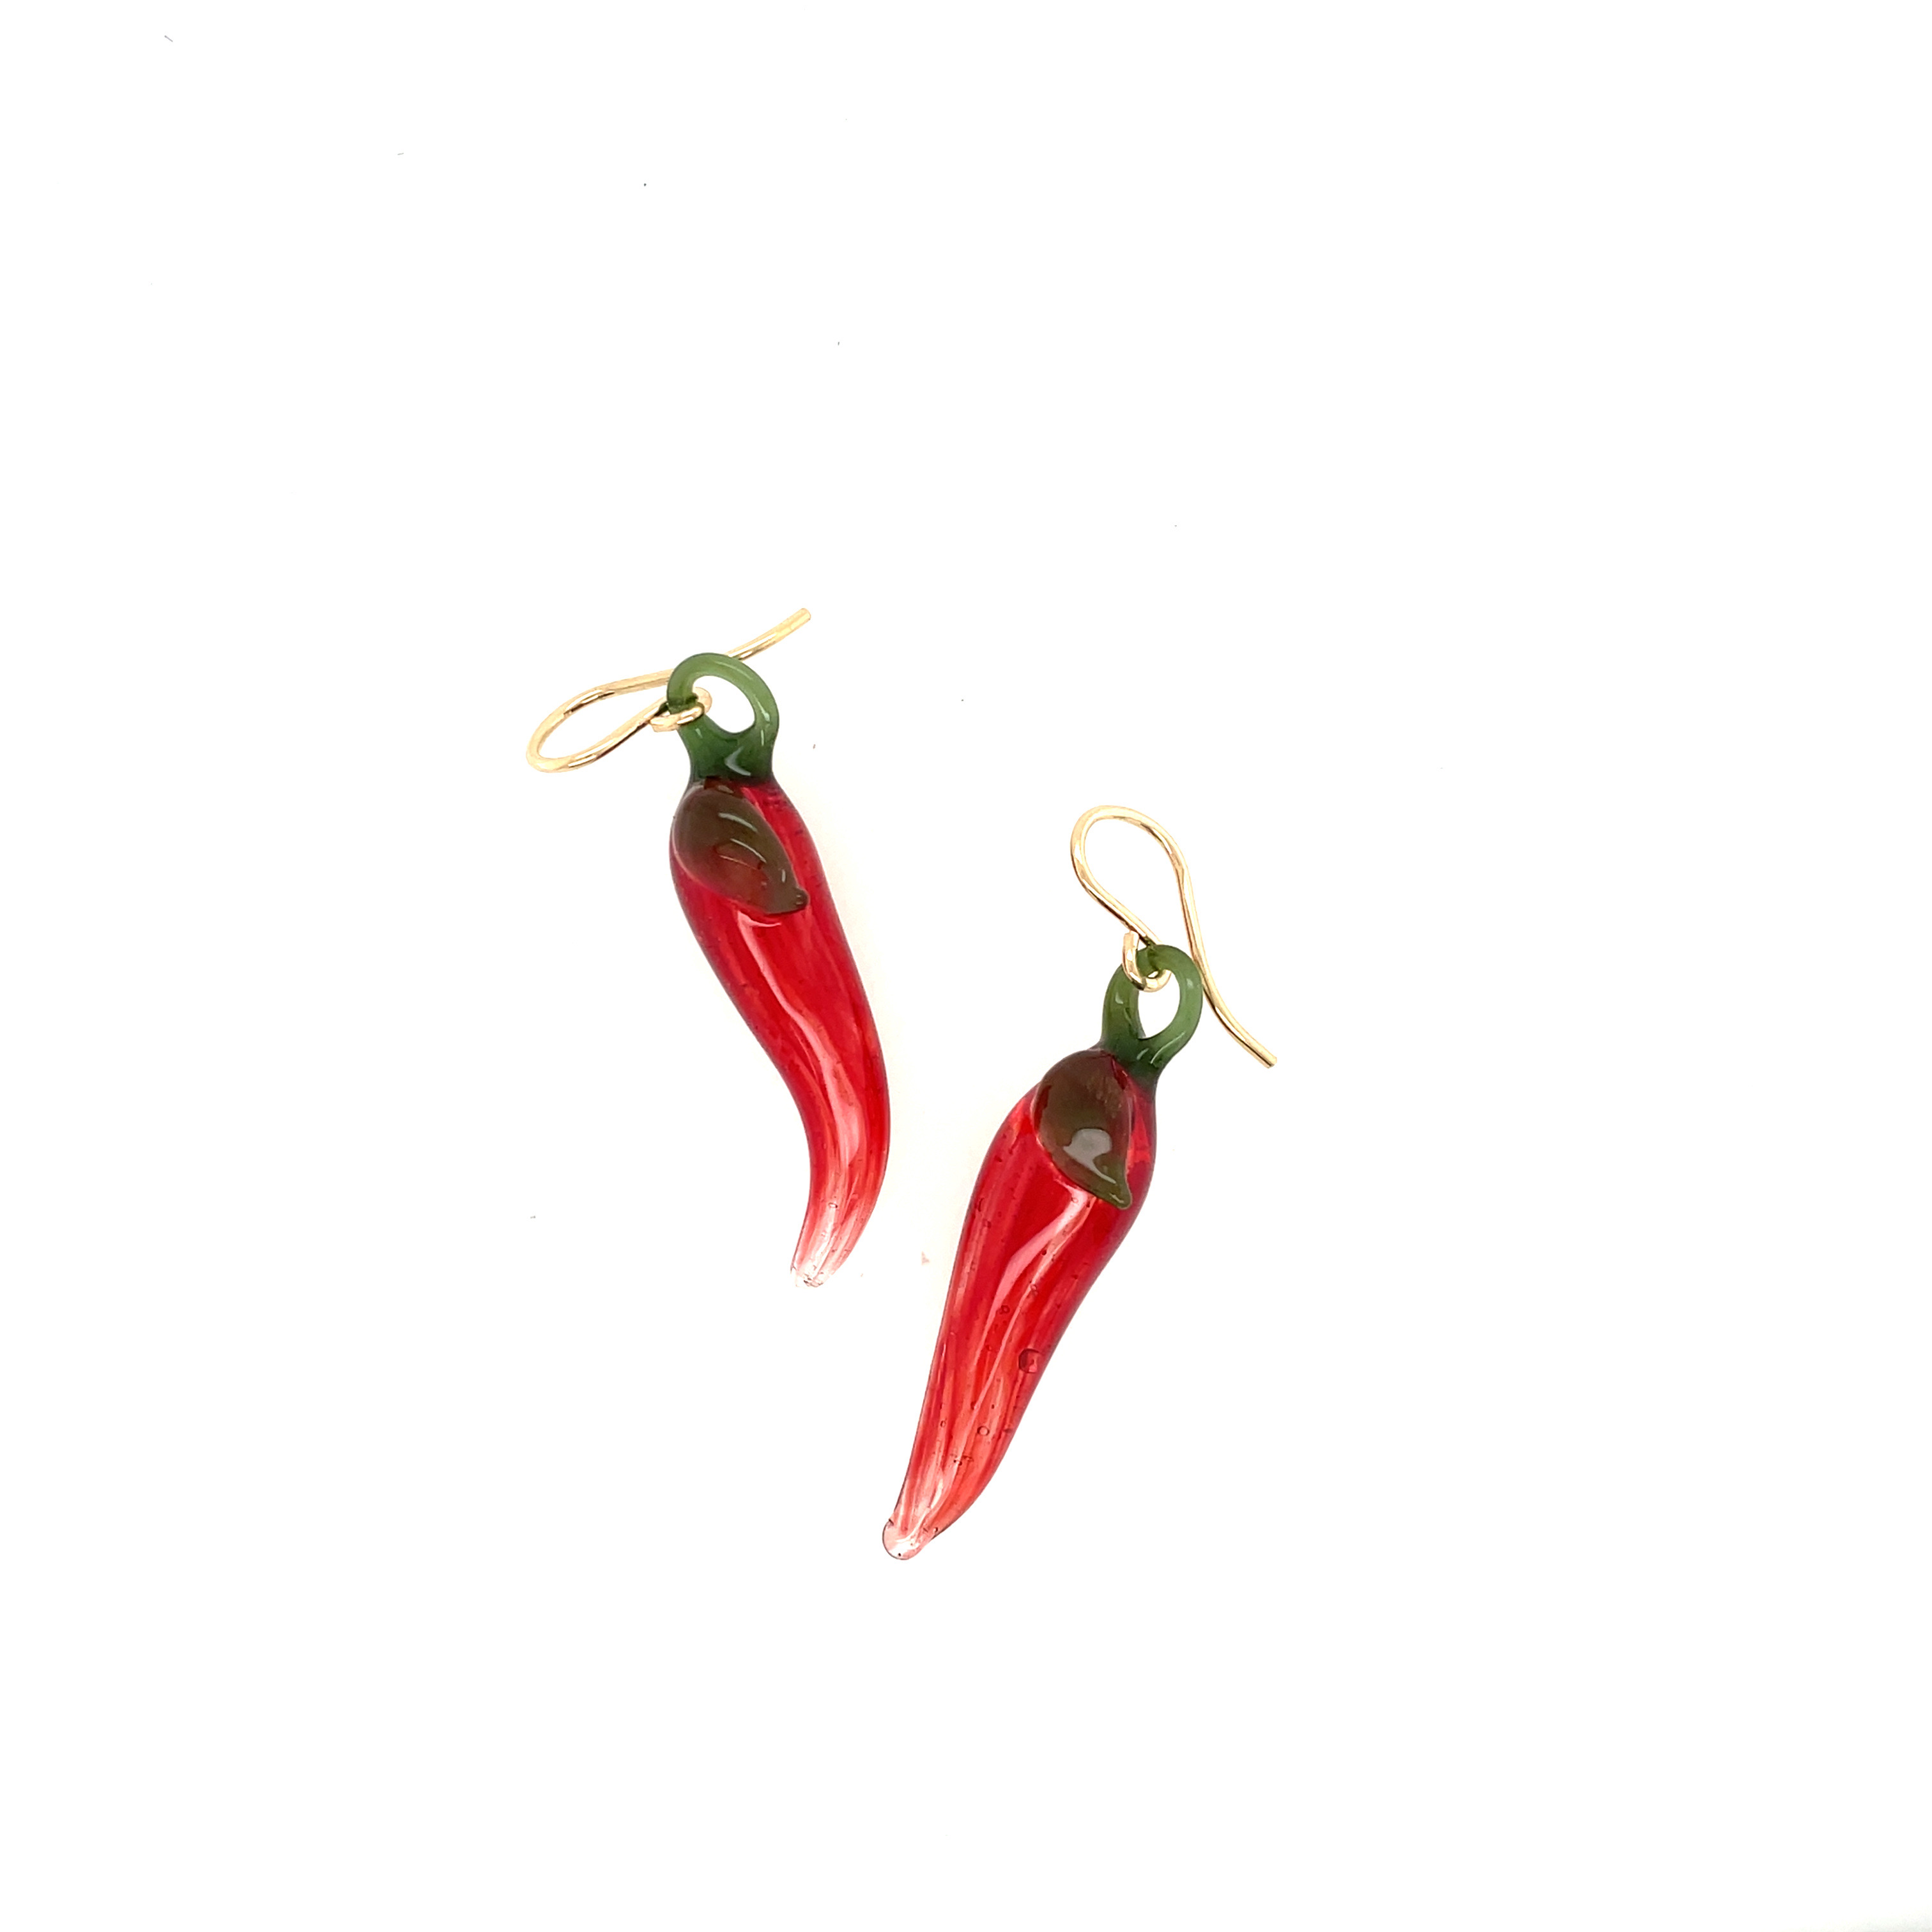 Chile Pepper with Green Leaves Earrings on Sterling Silver Wires